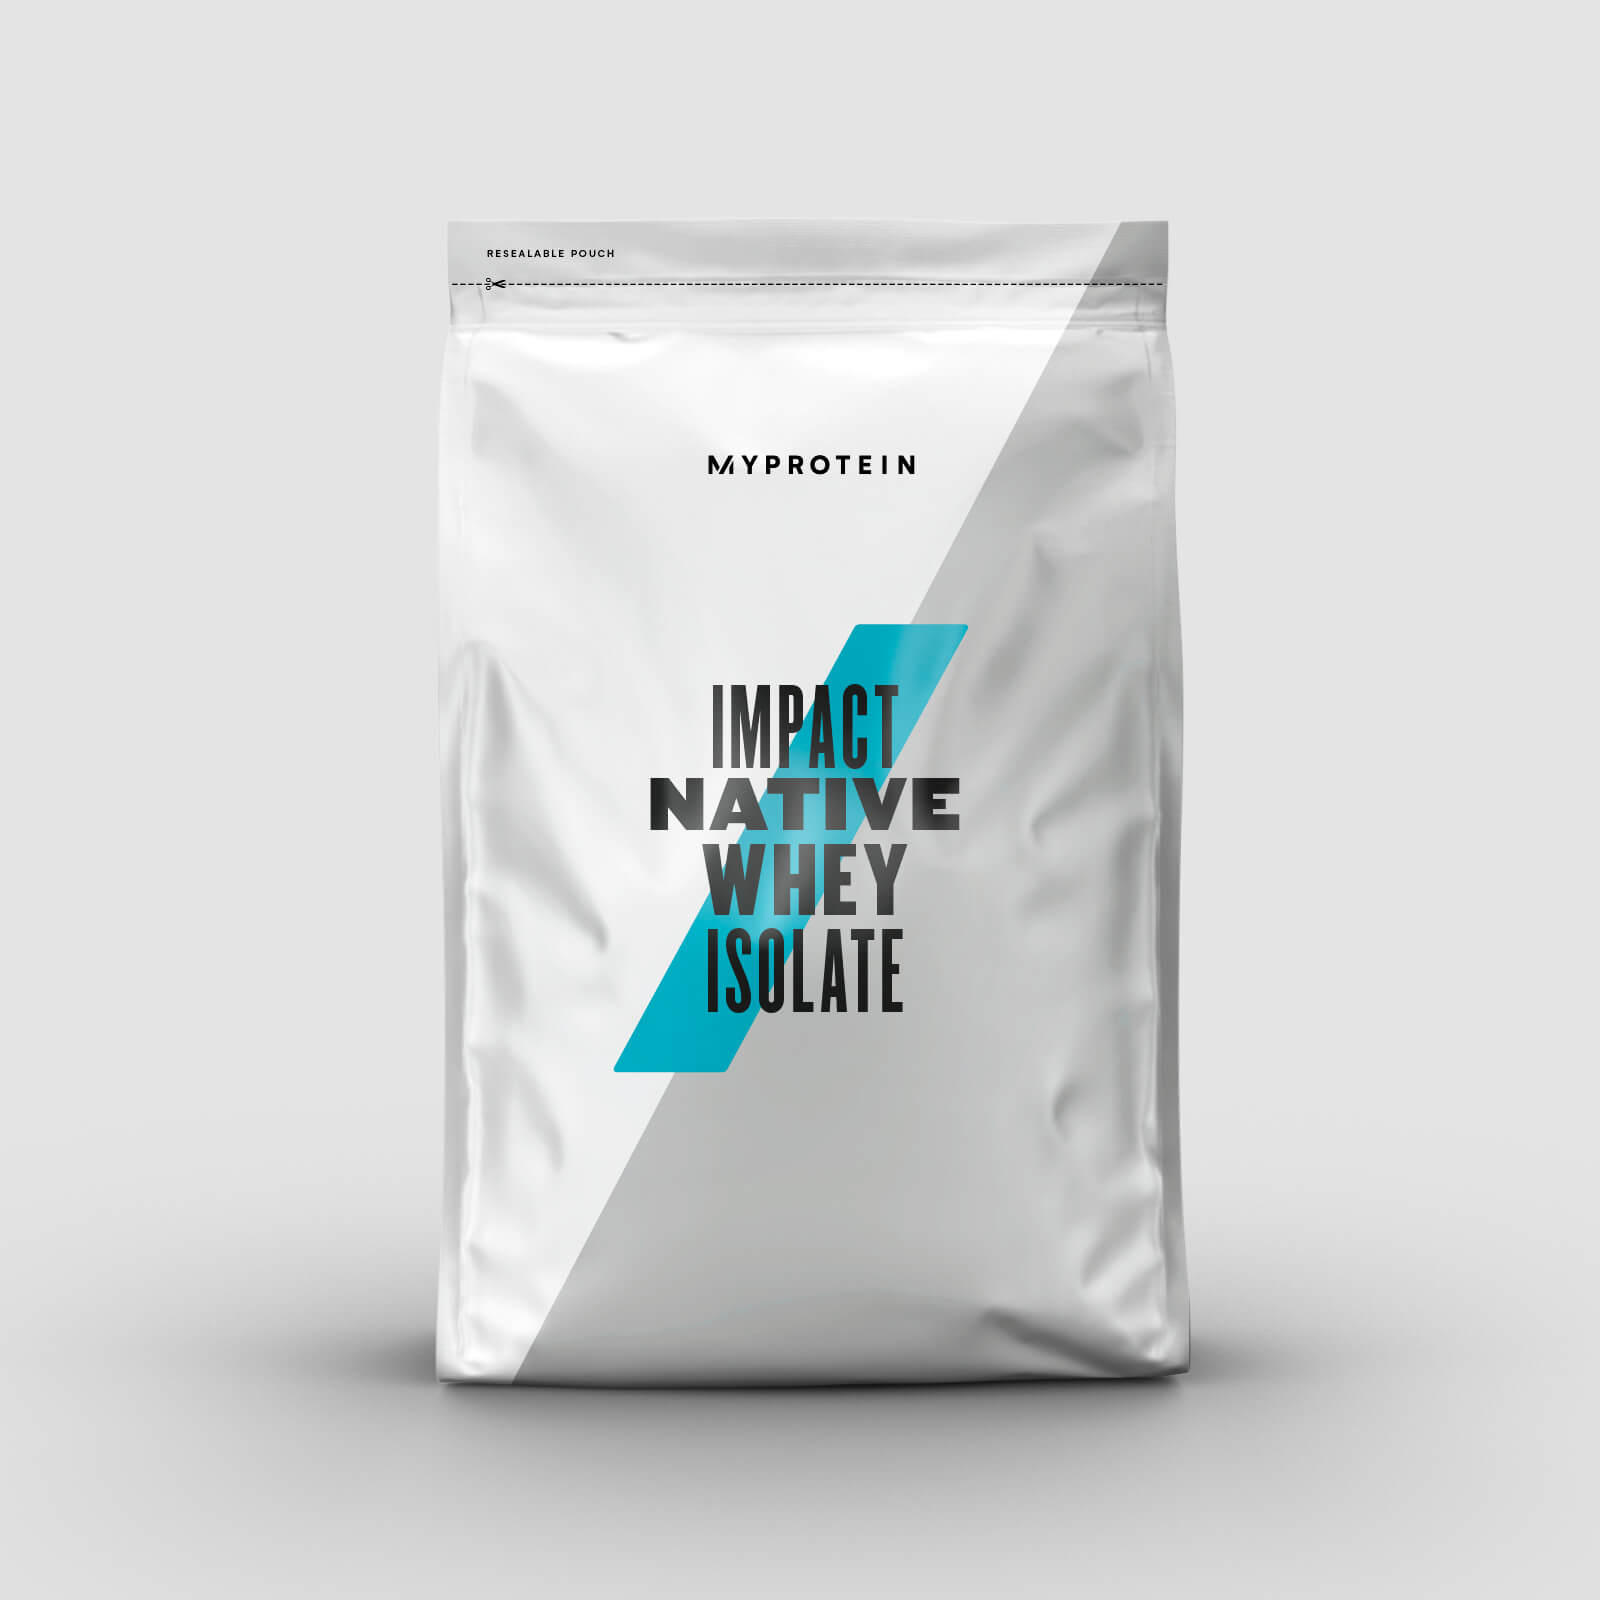 Myprotein Impact Native Whey Isolate - 1kg - Chocolate Natural